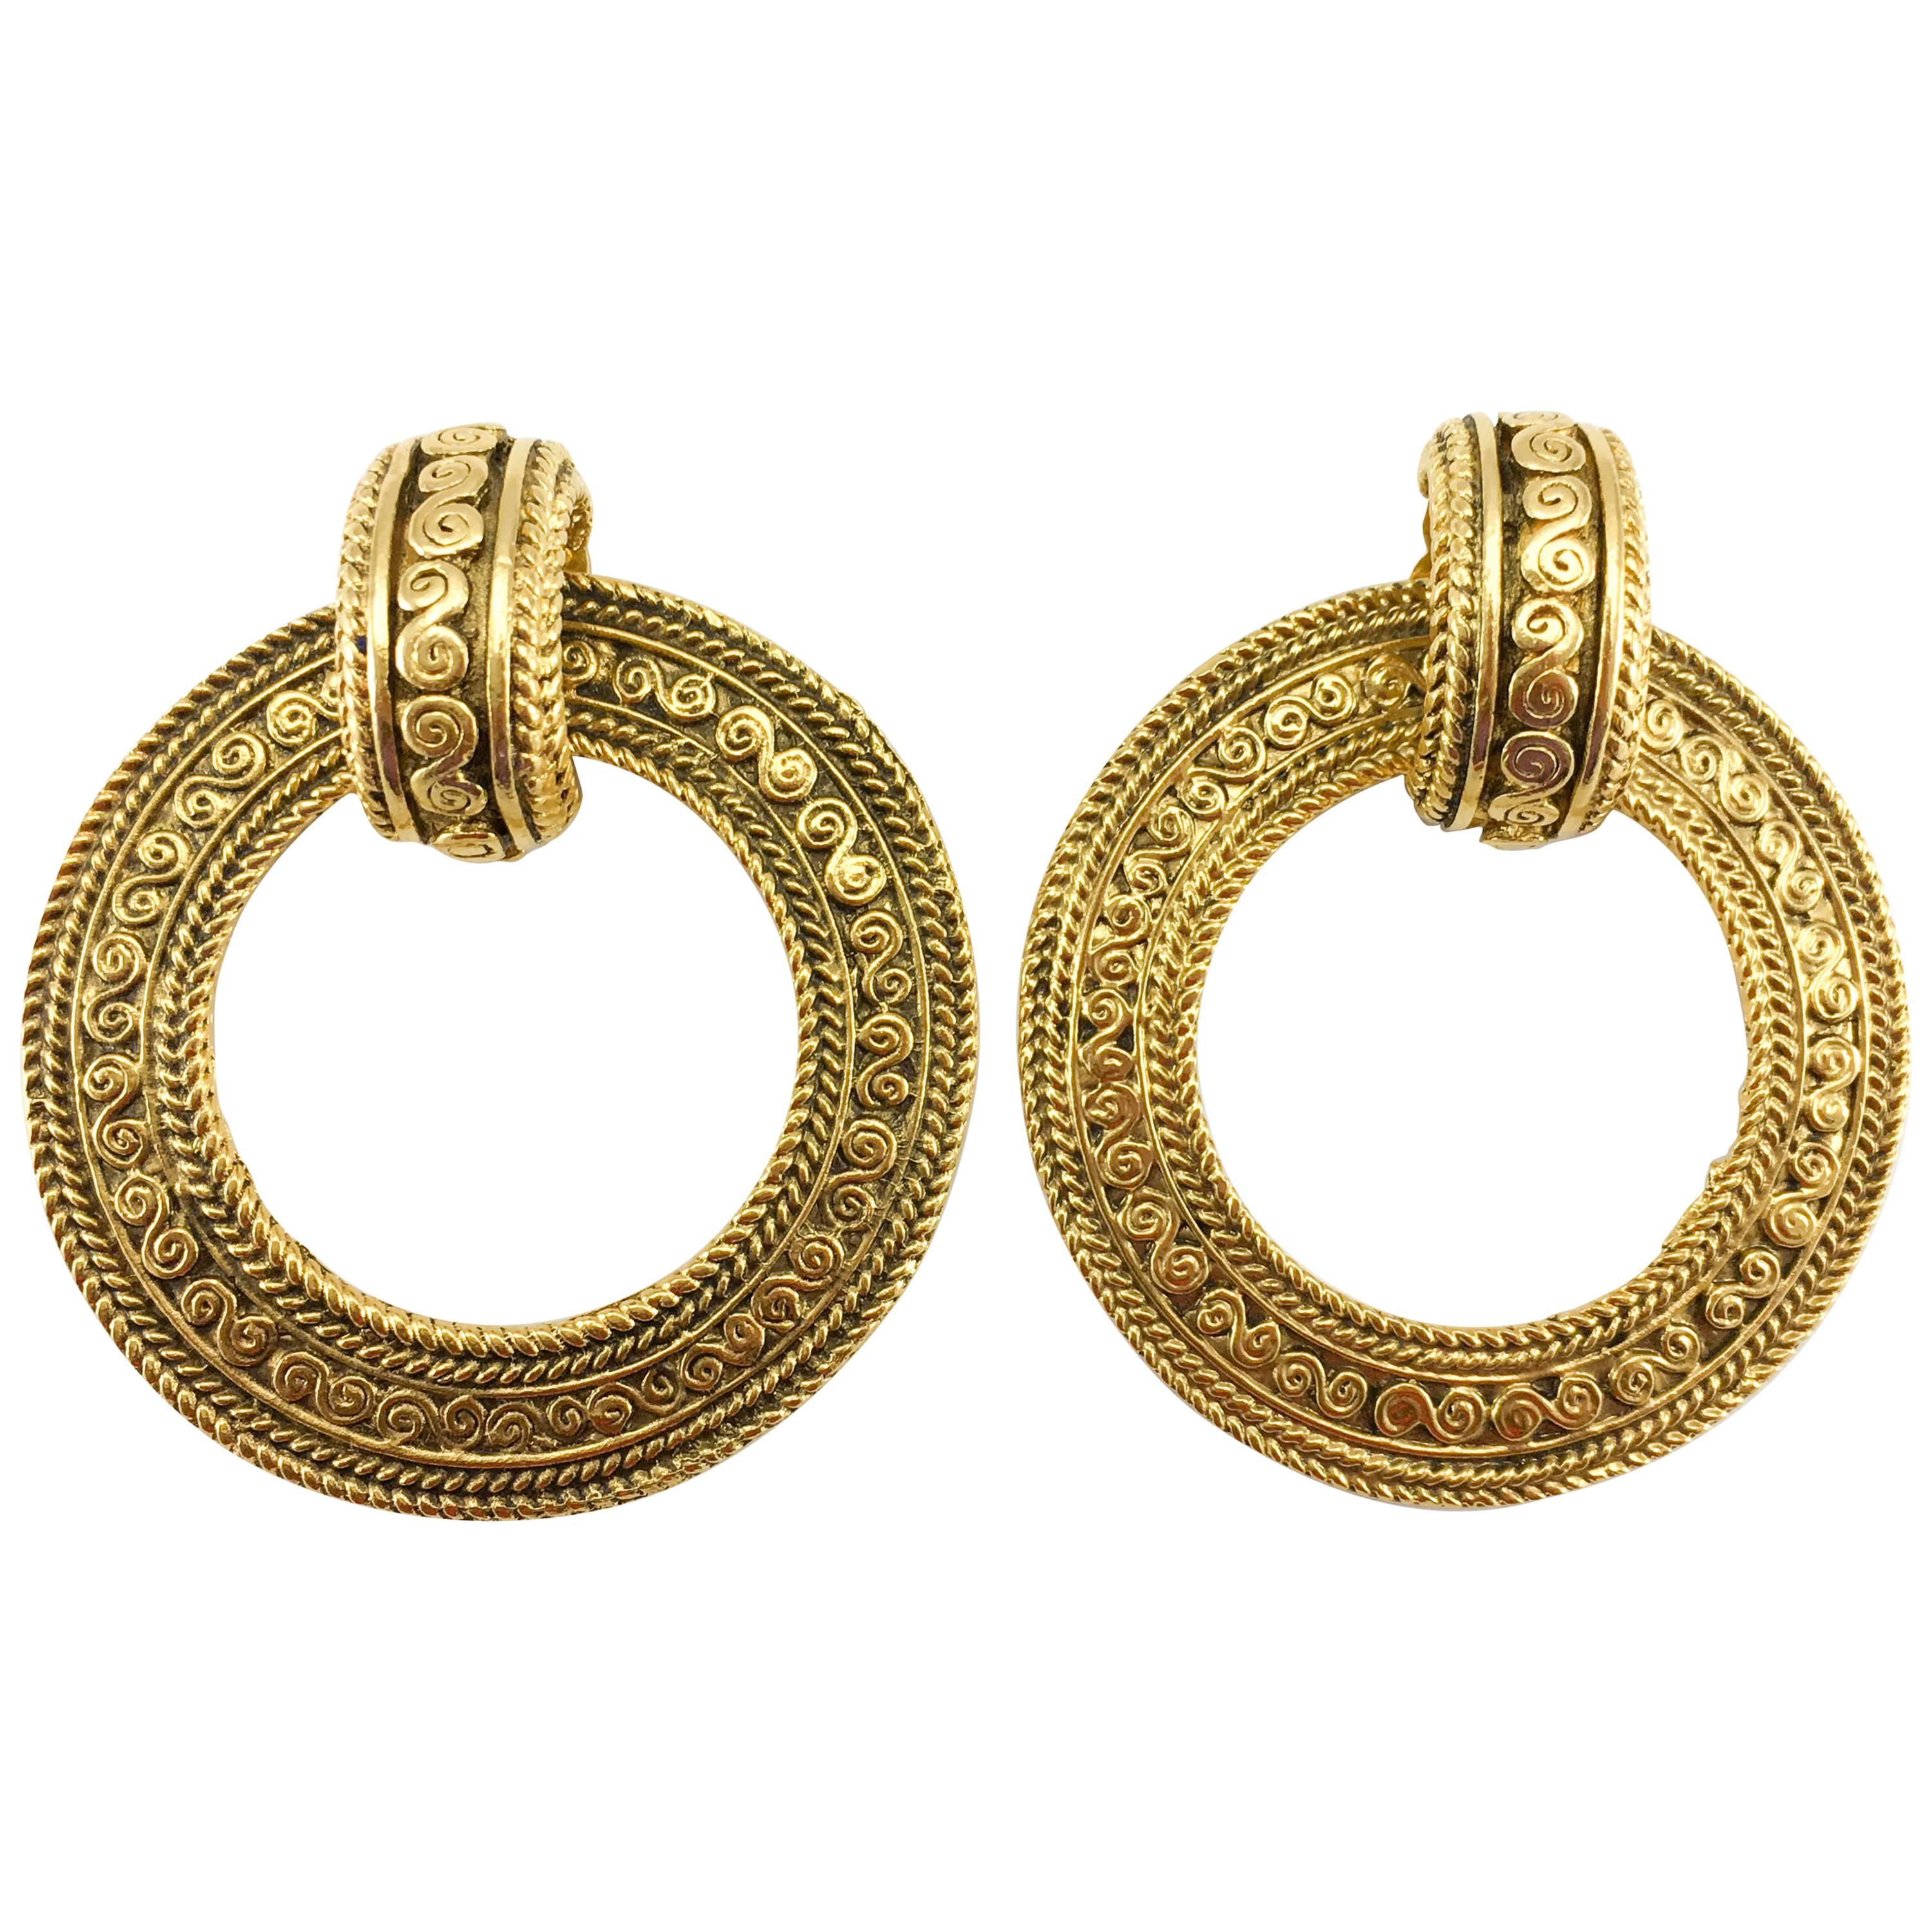 Chanel Large Baroque-Inspired Gold-Plated Hoop Earrings, 1980s 